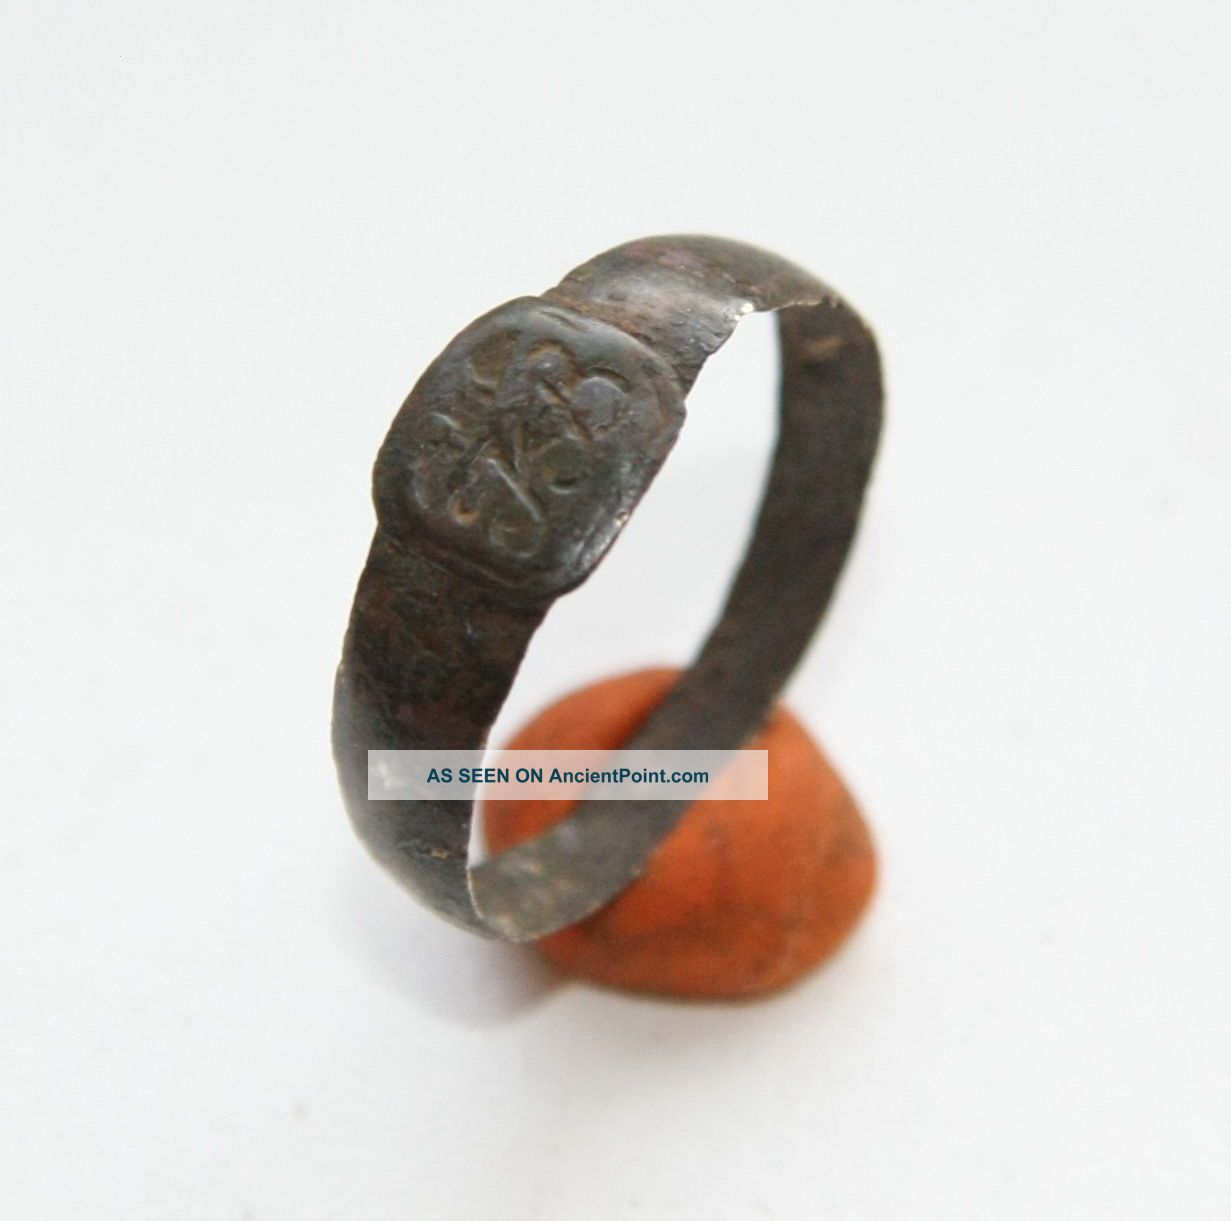 Antique Bronze Finger Ring With Initials 